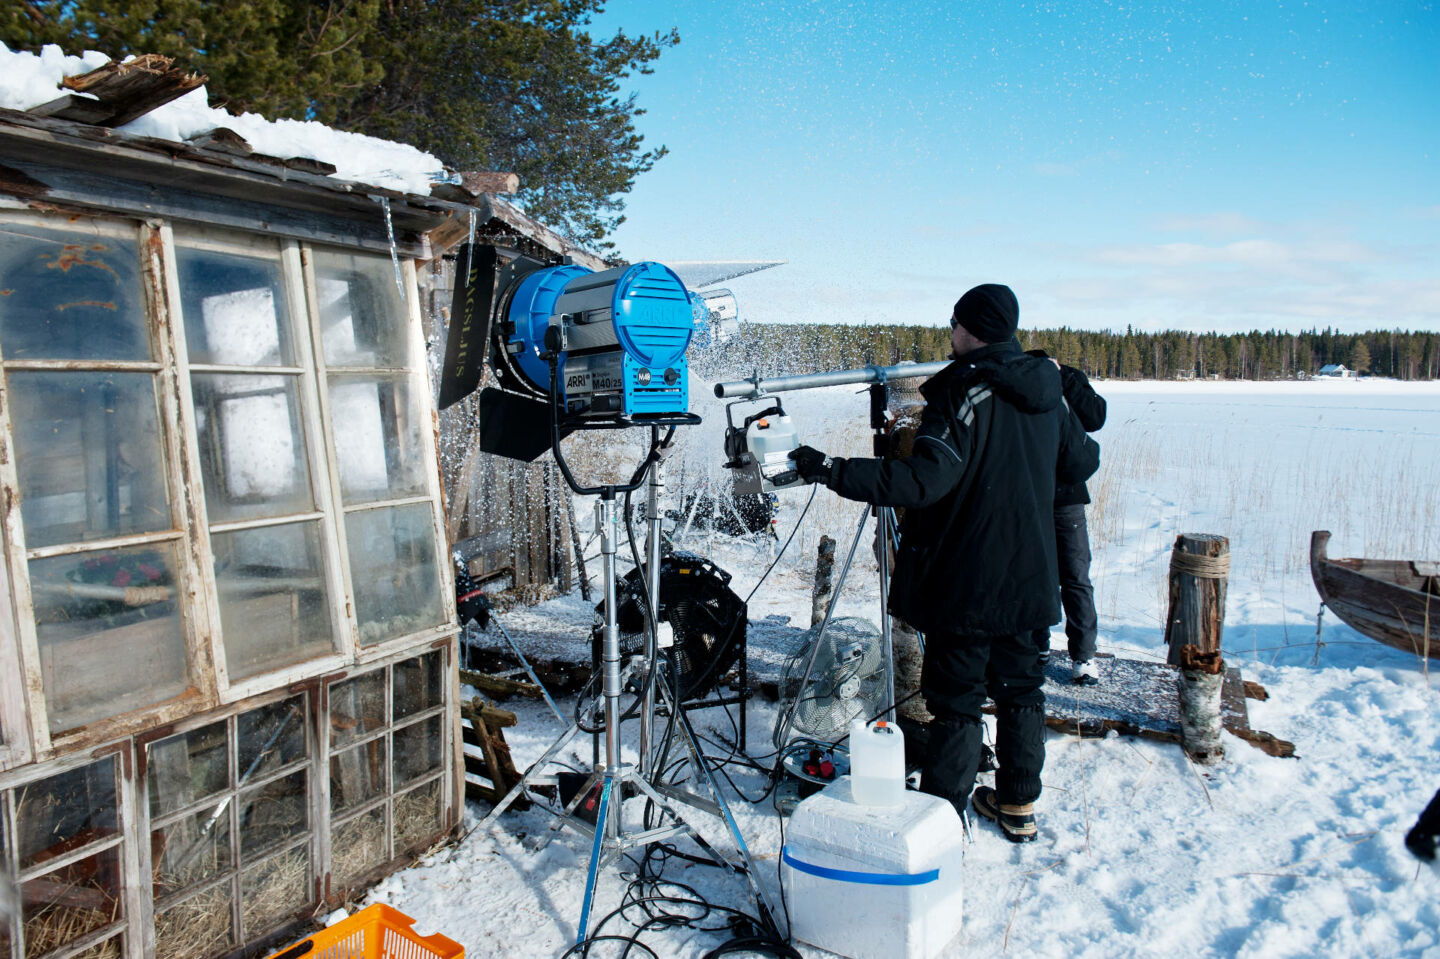 Filming on a frozen lake in Finnish Lapland